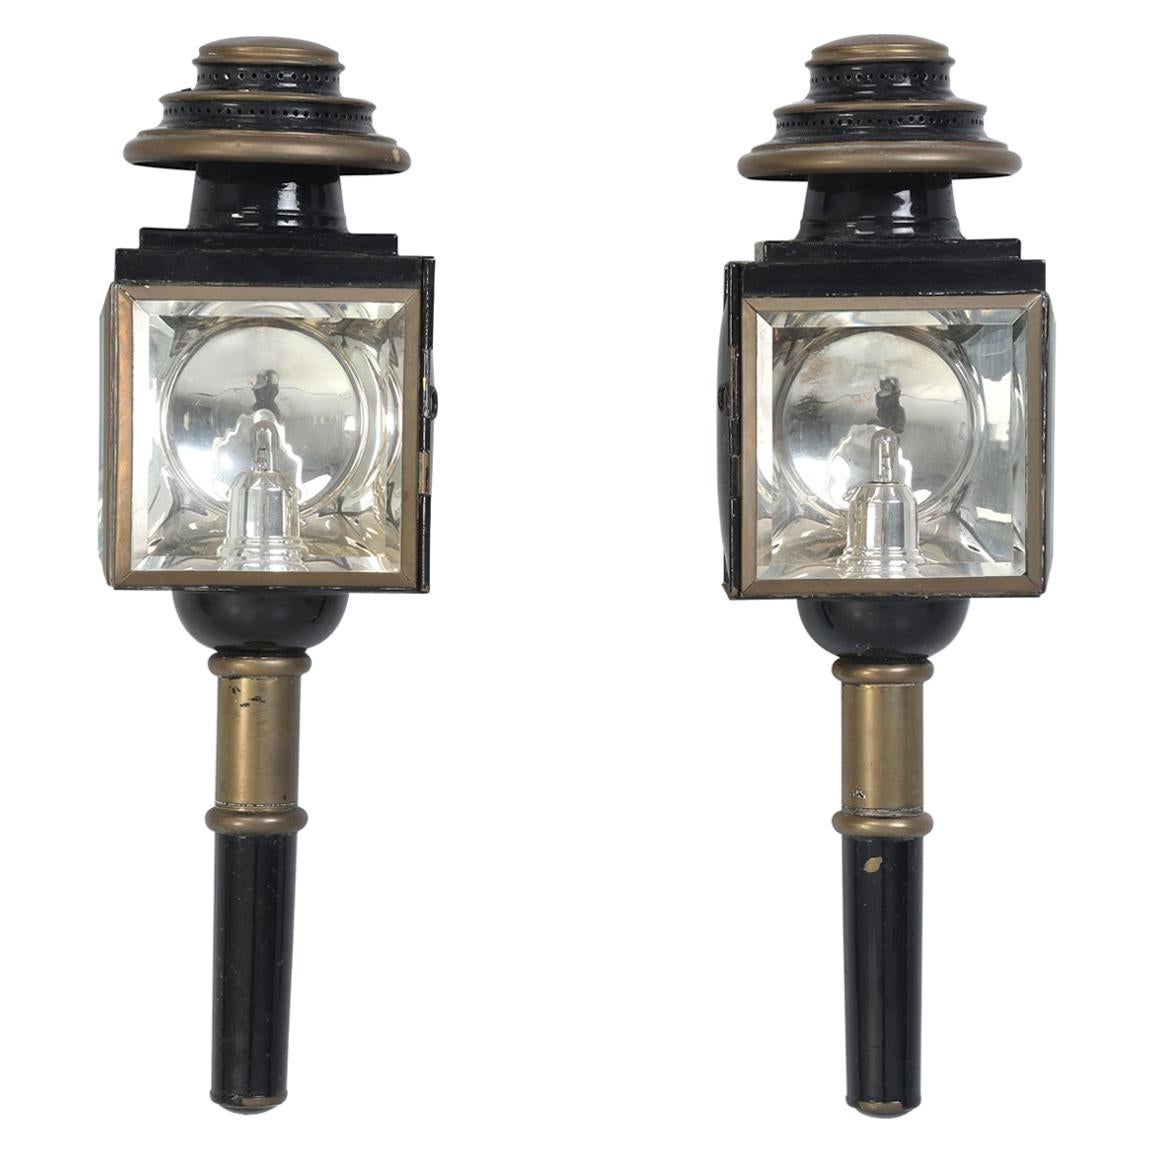 Pair of Antique Coach Lights or Lanterns, Converted into Sconces